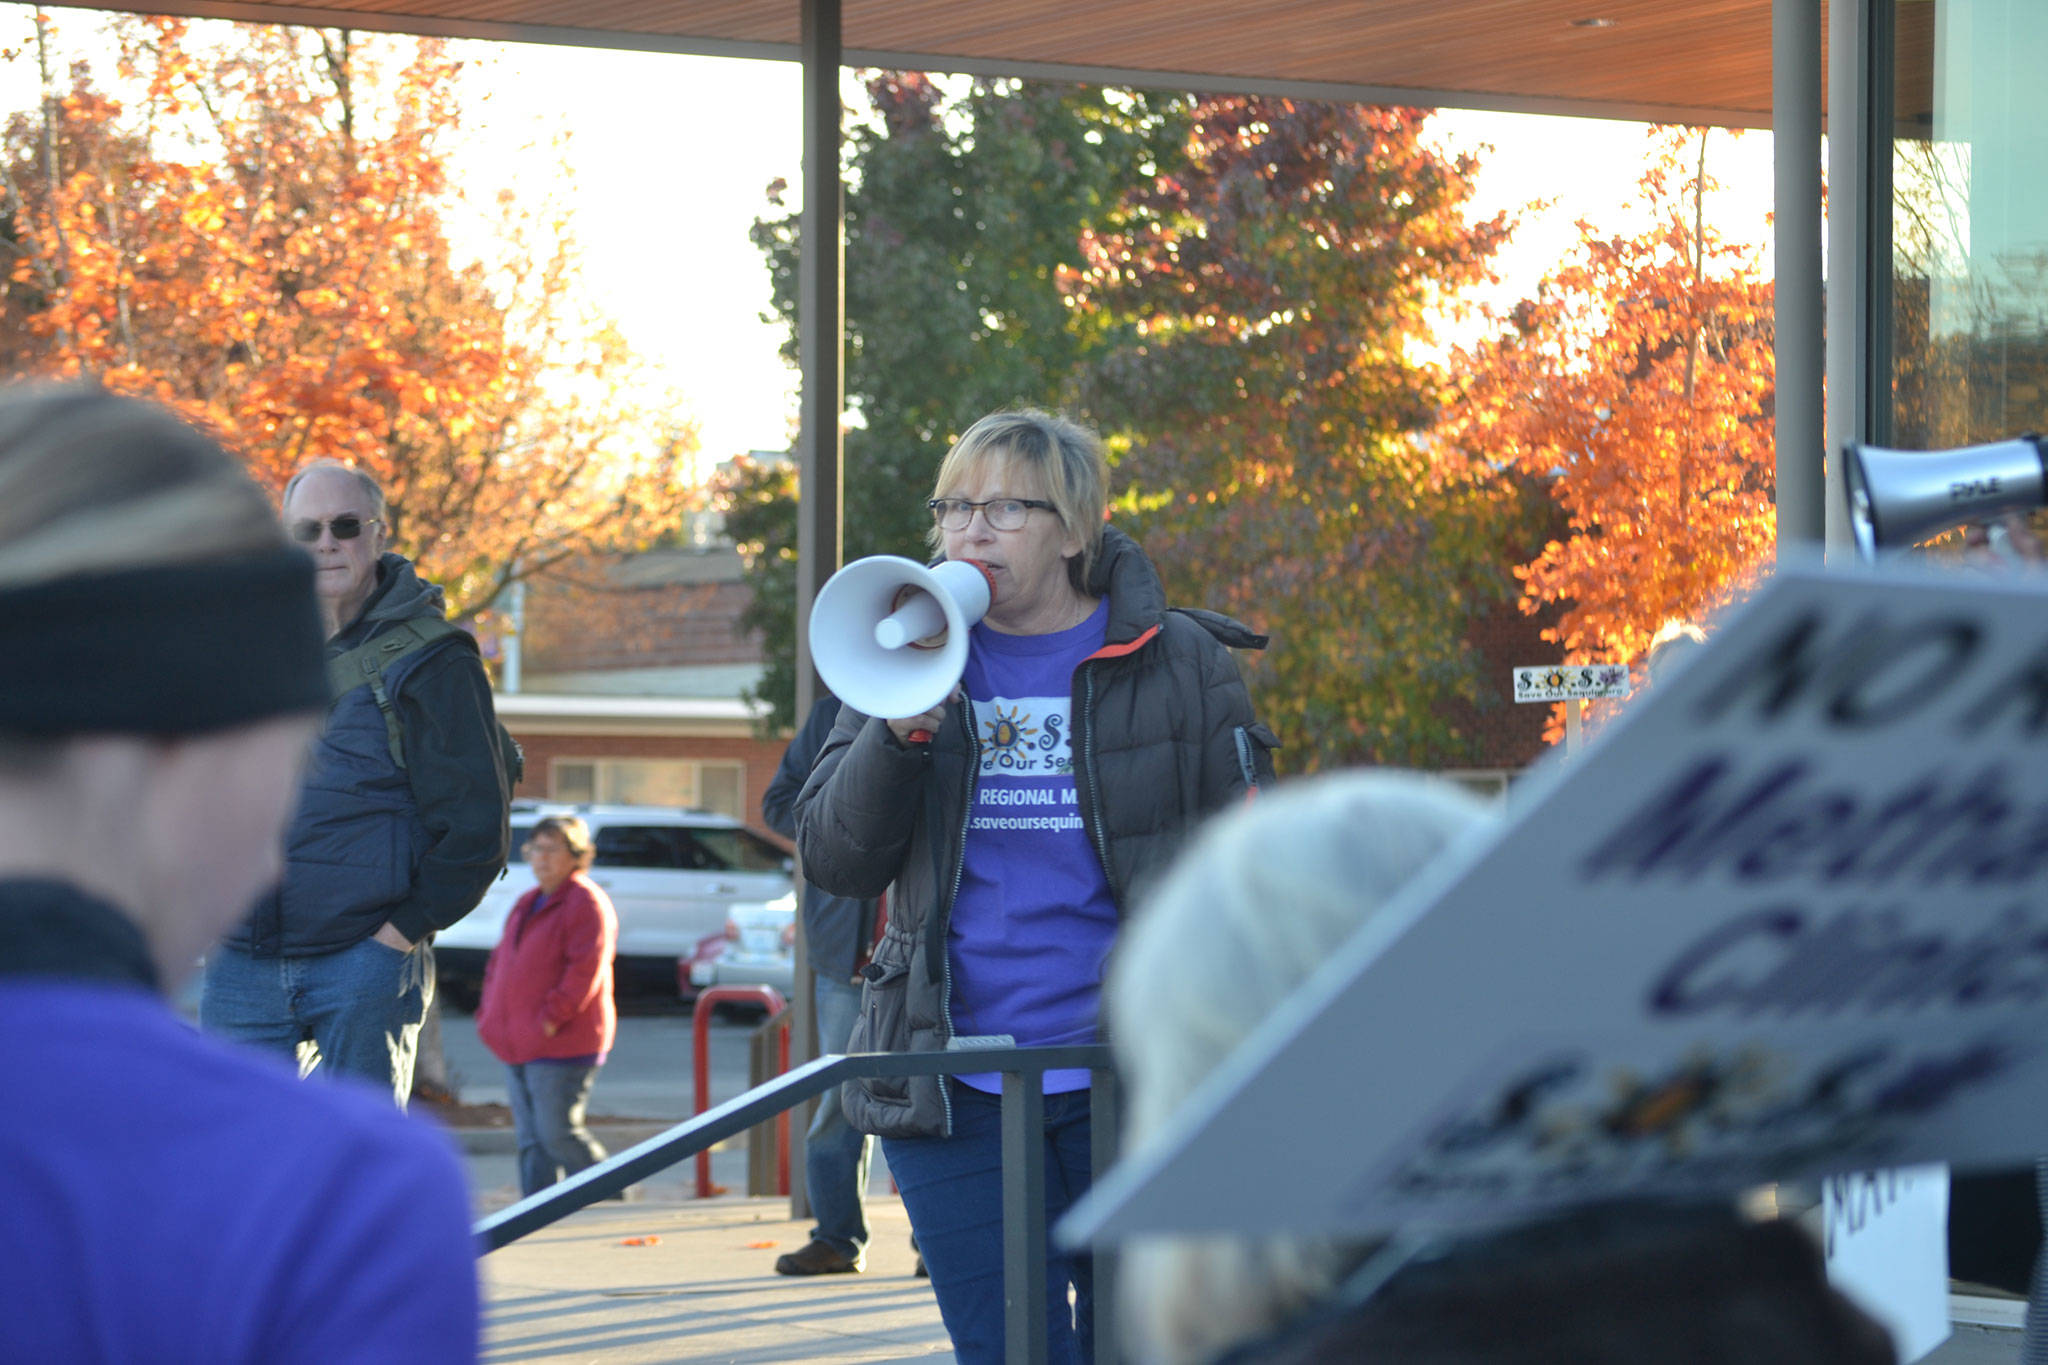 Members of Save Our Sequim, including chairman Jodi Wilke, seen here at a rally in October 2019, and Jon Gibson, owner of Parkwood Manufactured Housing Community seek to halt the application for the medication-assisted treatment (MAT) facility from moving forward with a May lawsuit through Clallam County Superior Court. Sequim Gazette photo by Matthew Nash